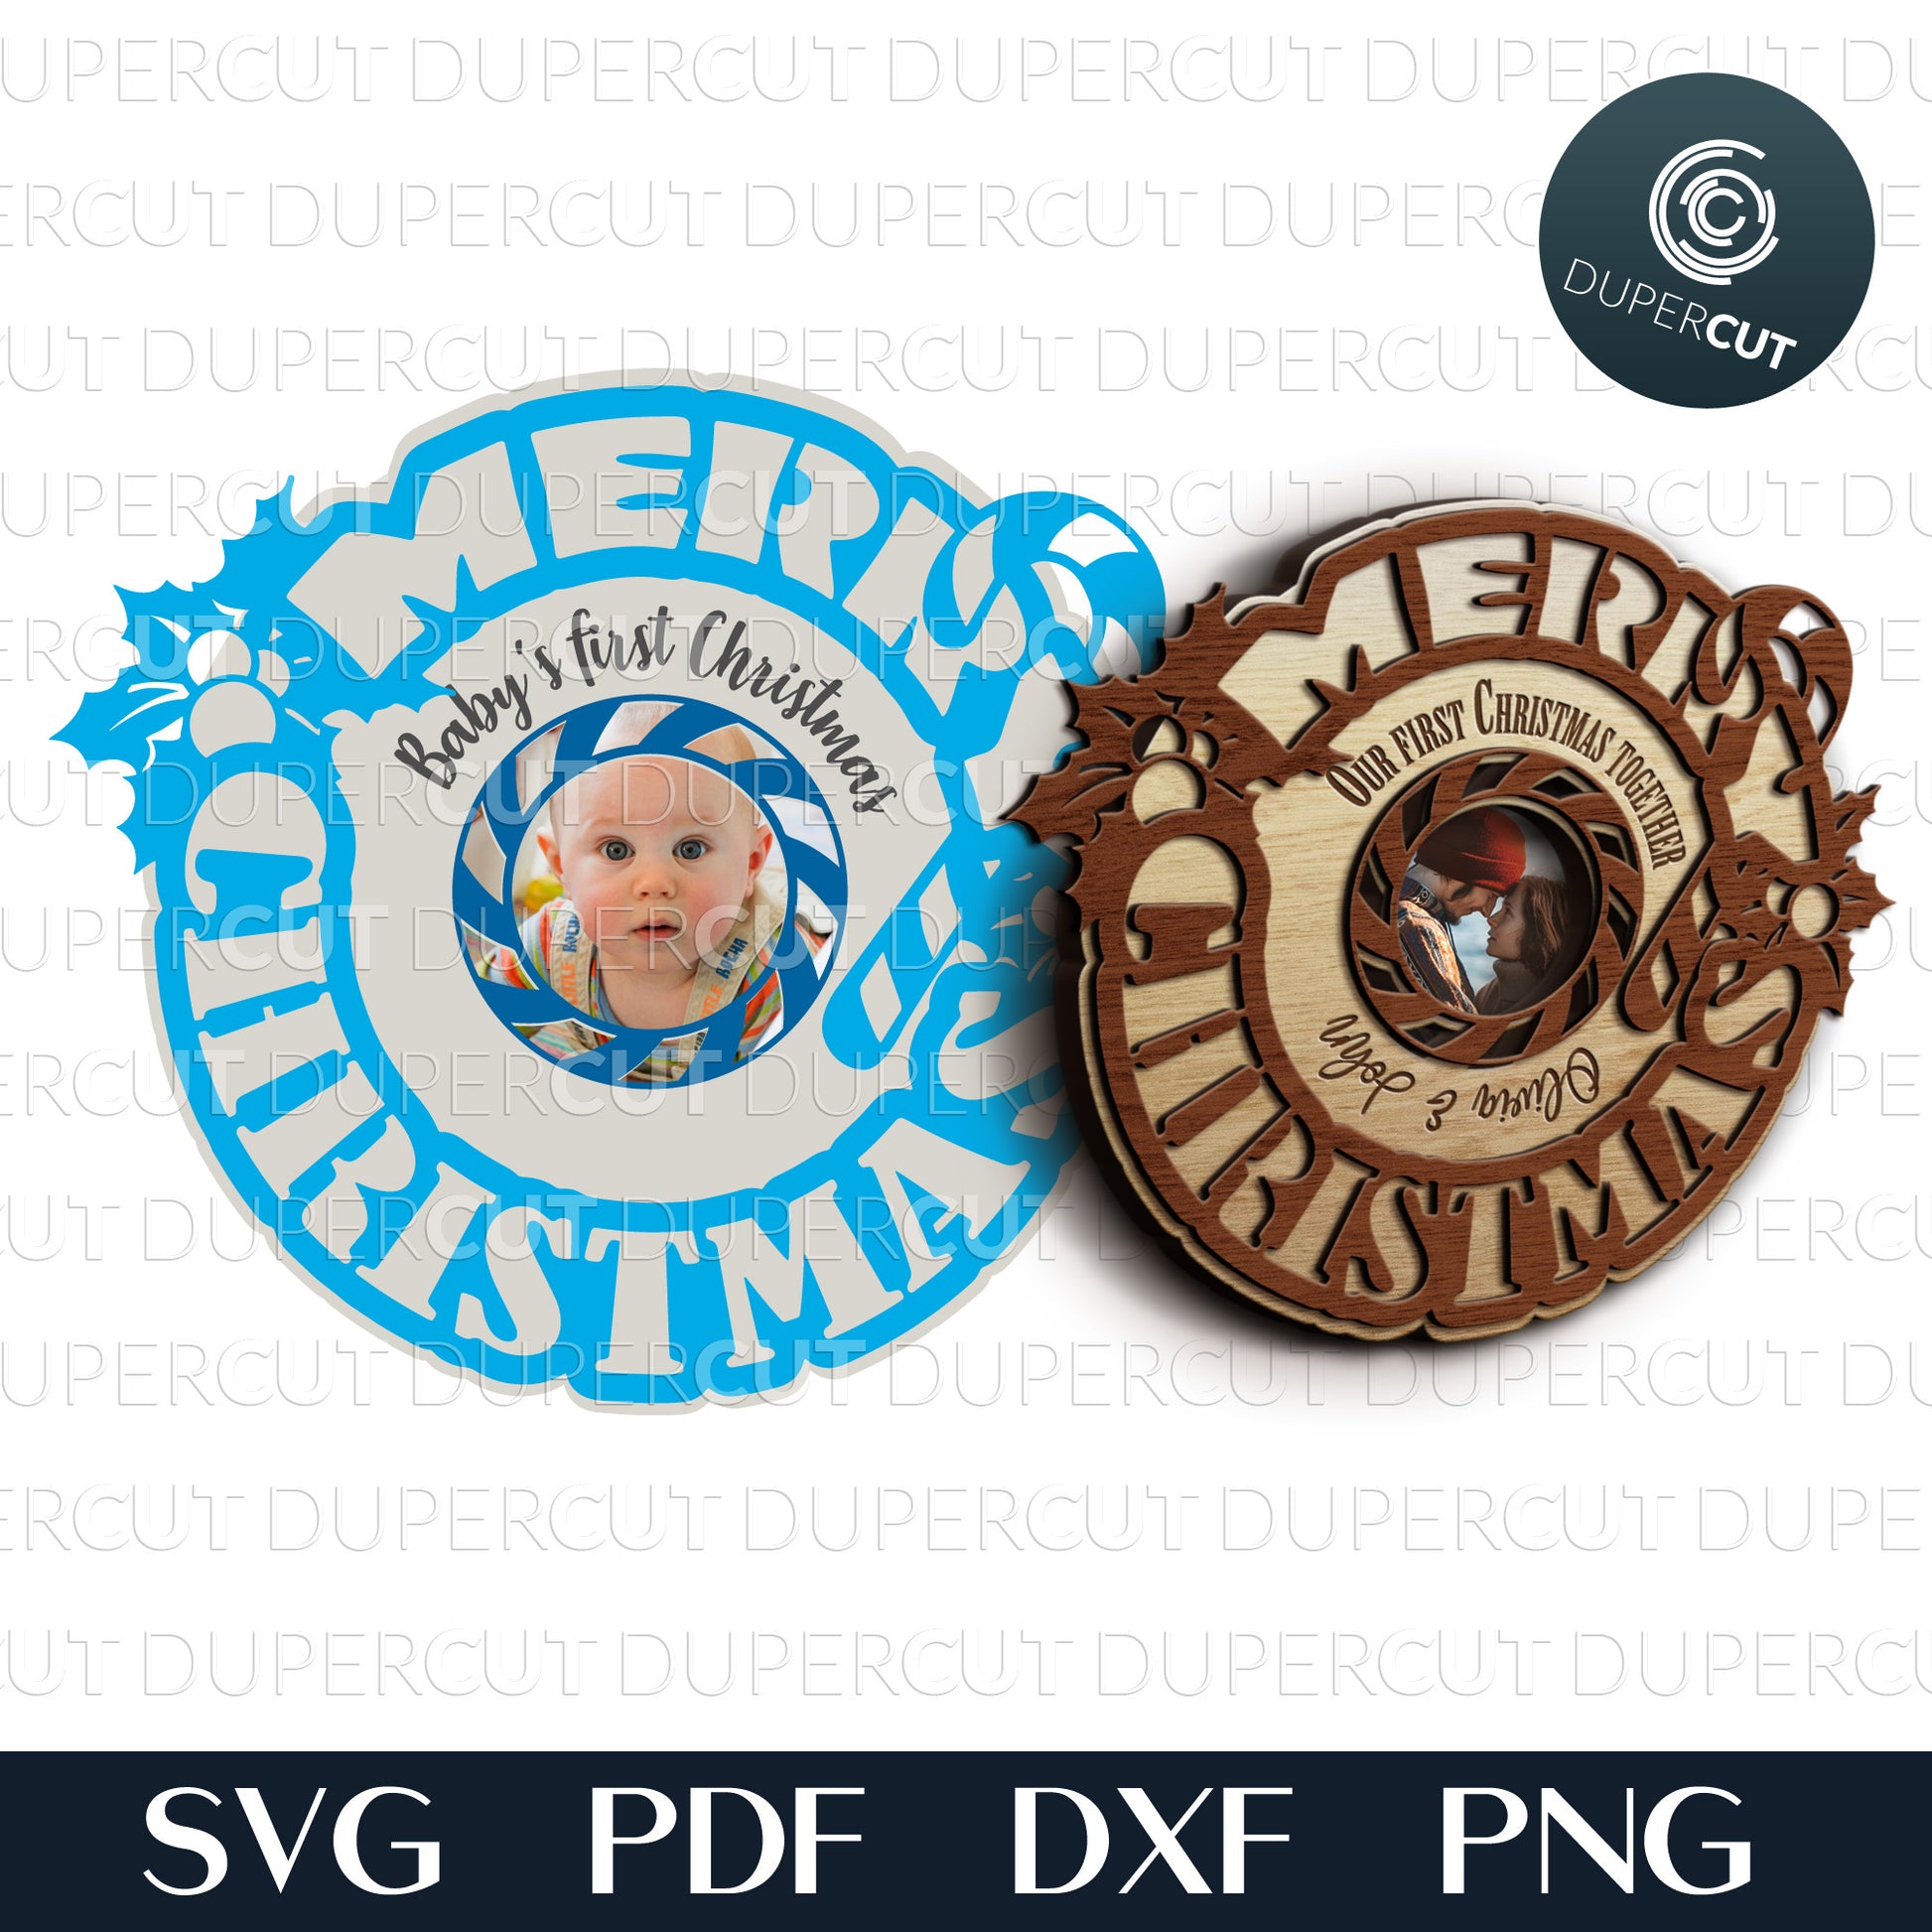 Personalized Christmas photo ornament - SVG PDF DXF layered vector files for laser cutting, Glowforge, Cricut, Silhouette Cameo, CNC plasma machines